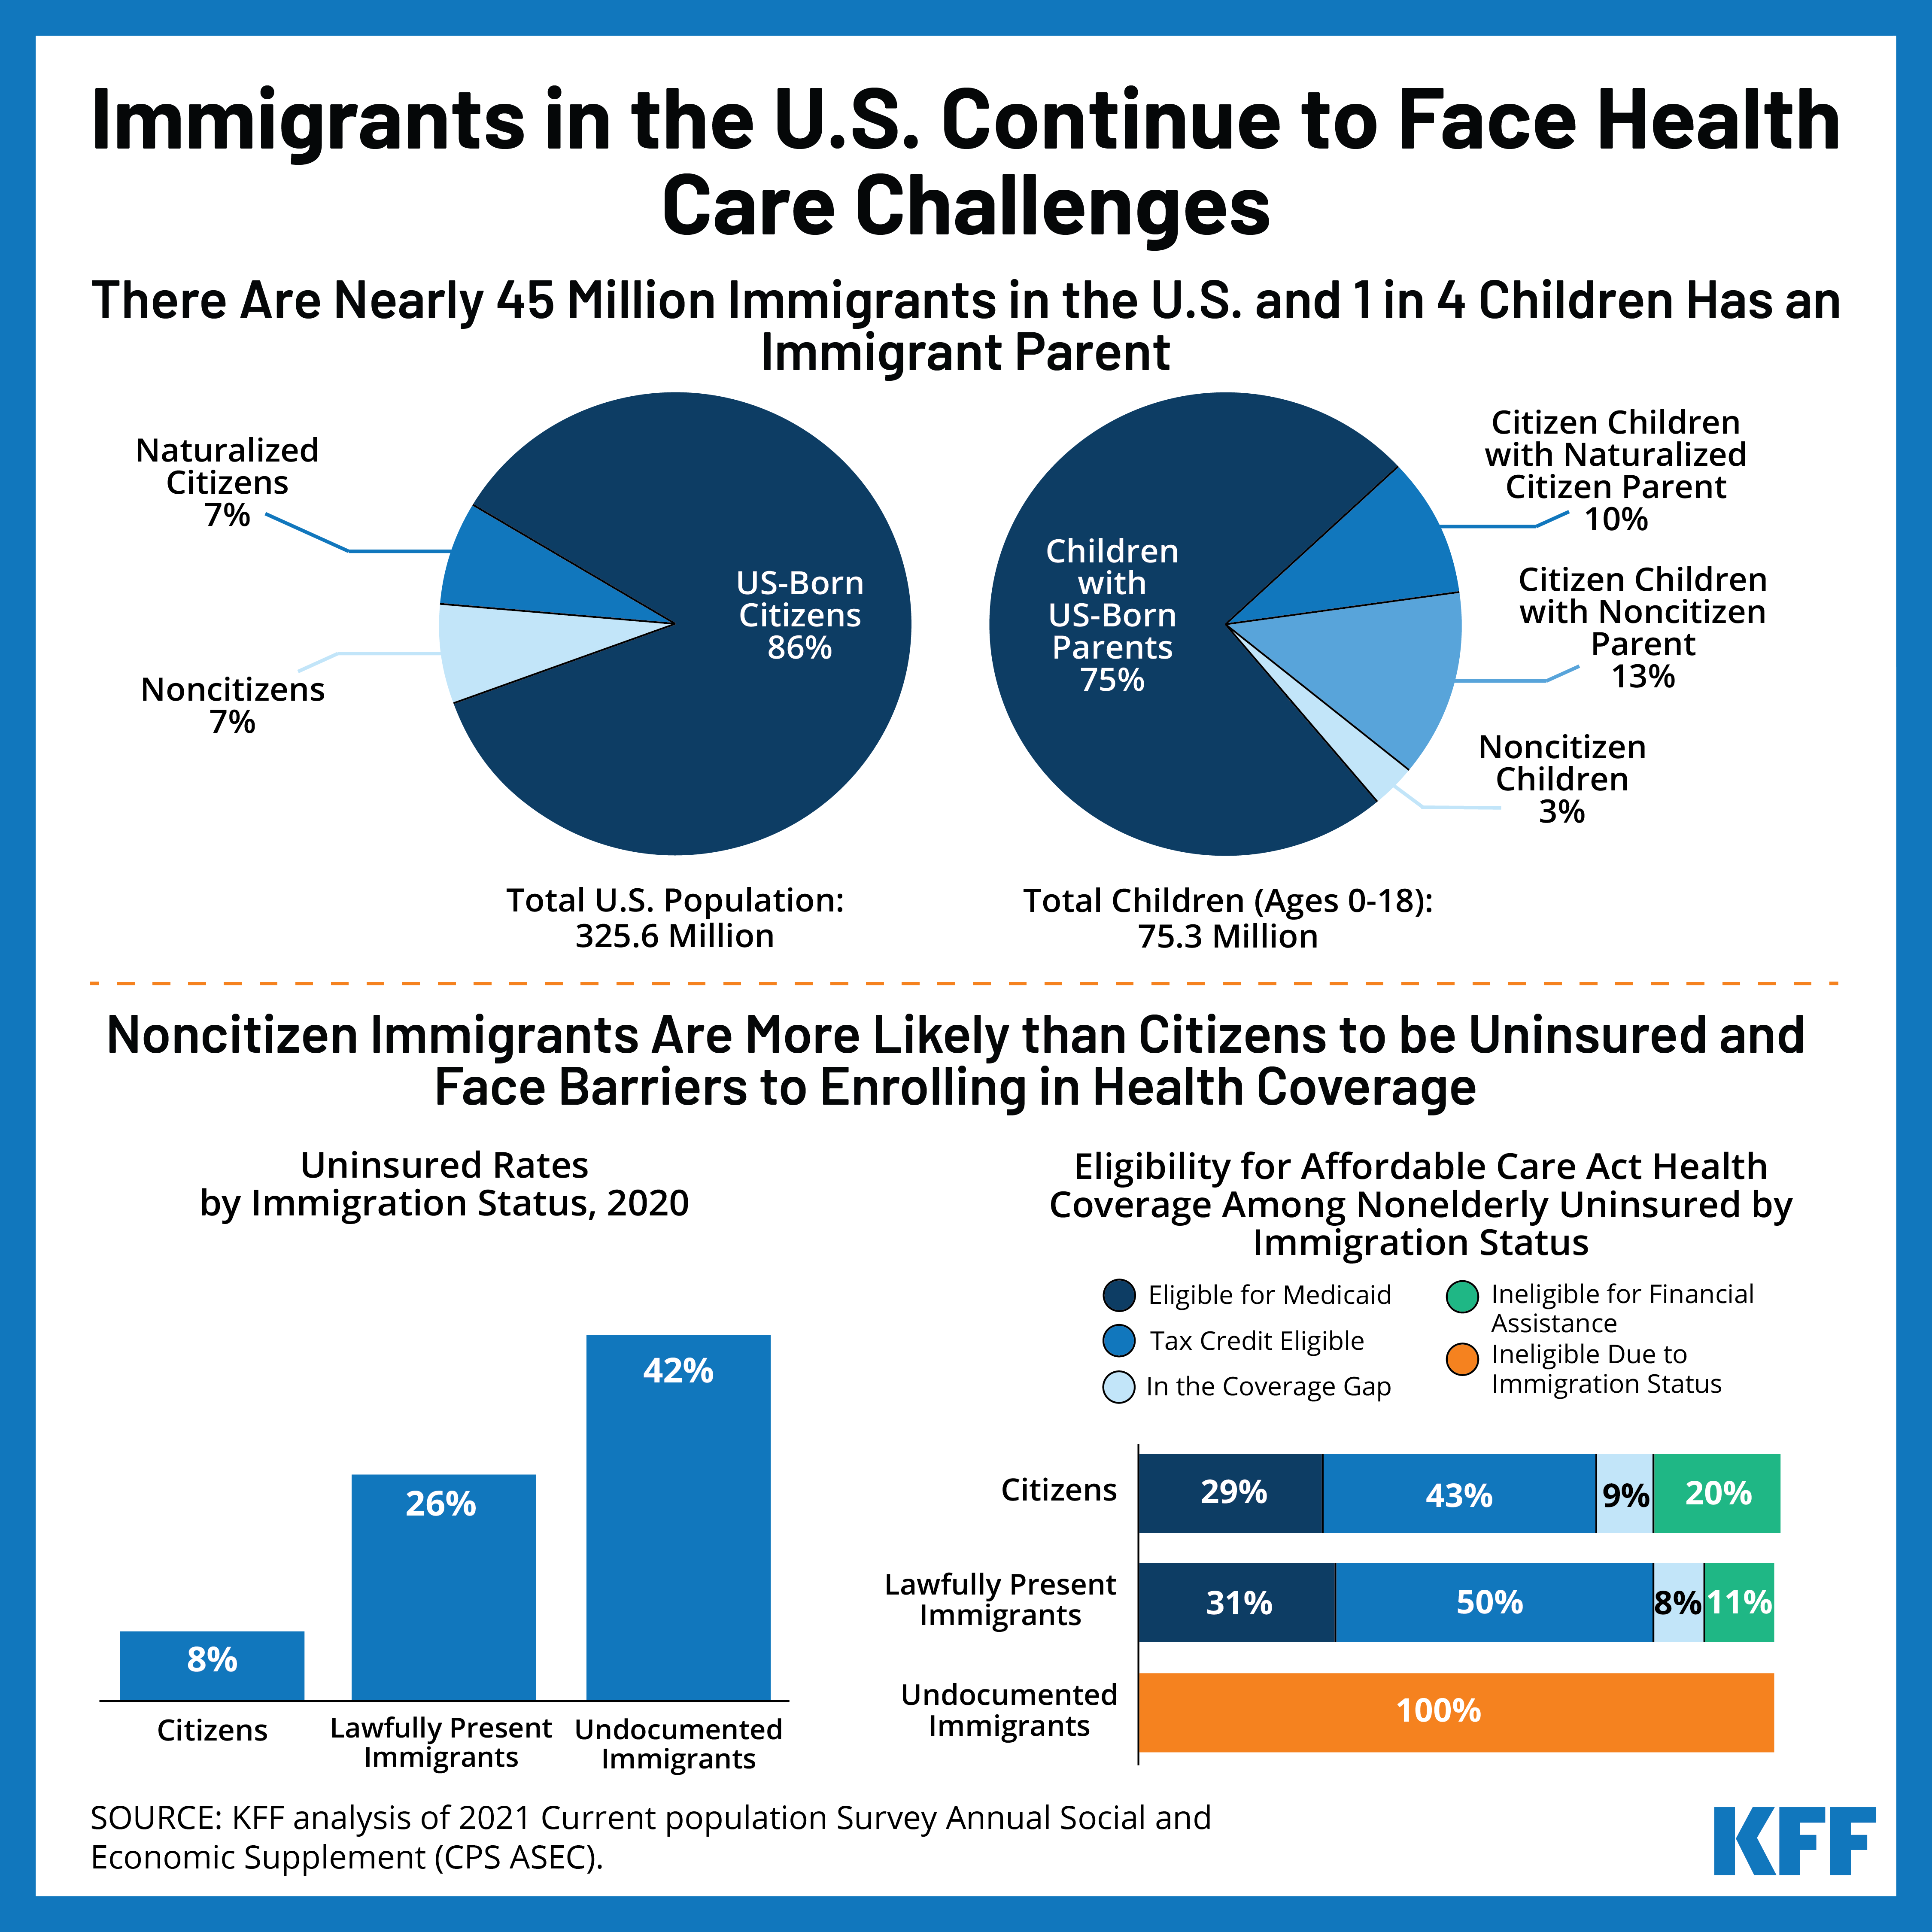 Immigrants in the U.S. Continue to Face Health Care Challenges | KFF